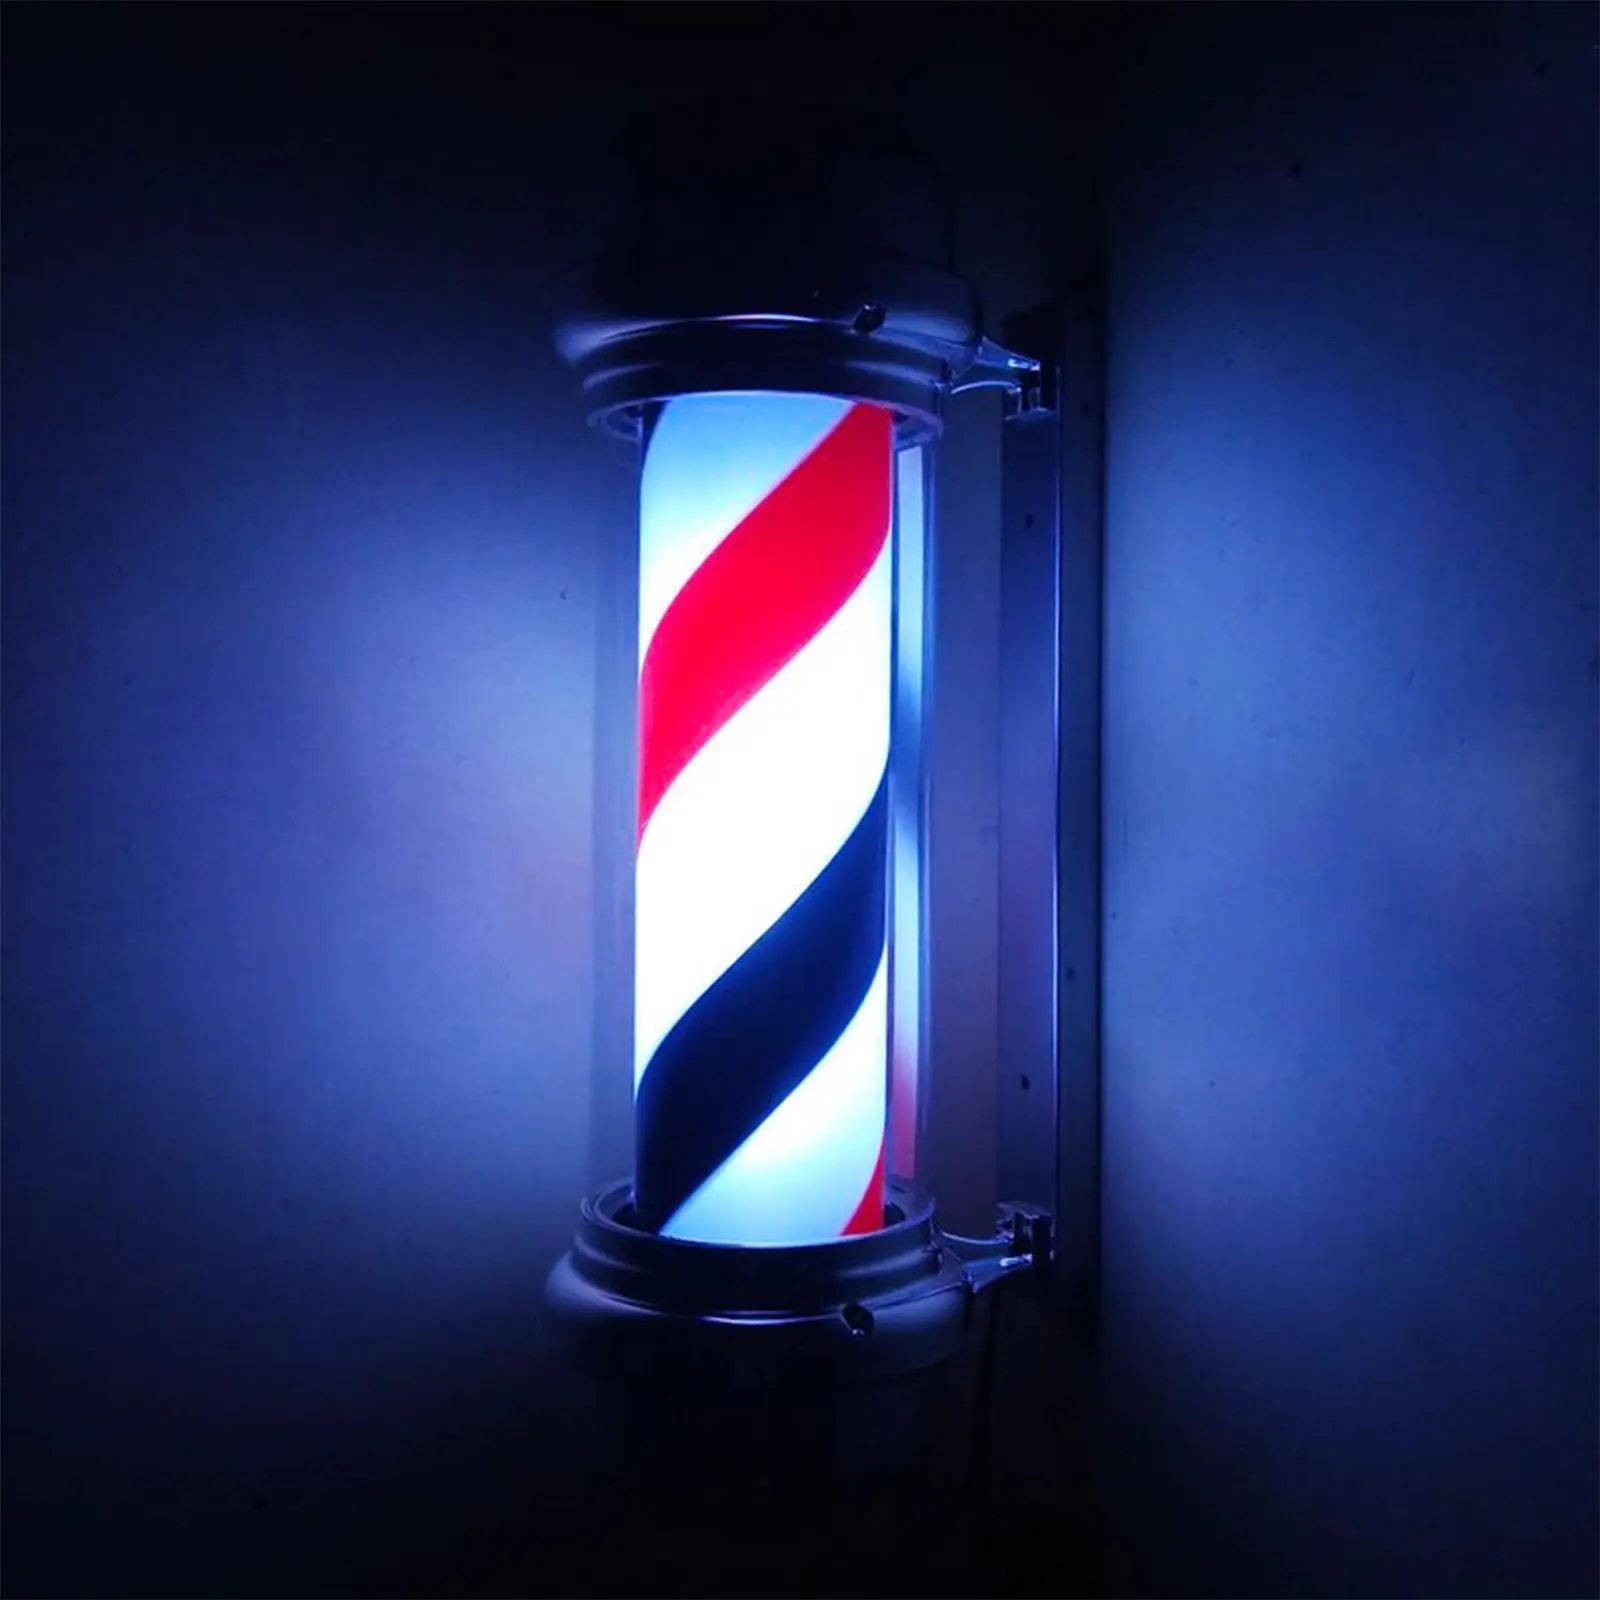 Hair Salon Sign LED Open Strips Waterproof Neon Signs Nightlight Hanging Rotating Barber Pole Light for Window Barber Shop